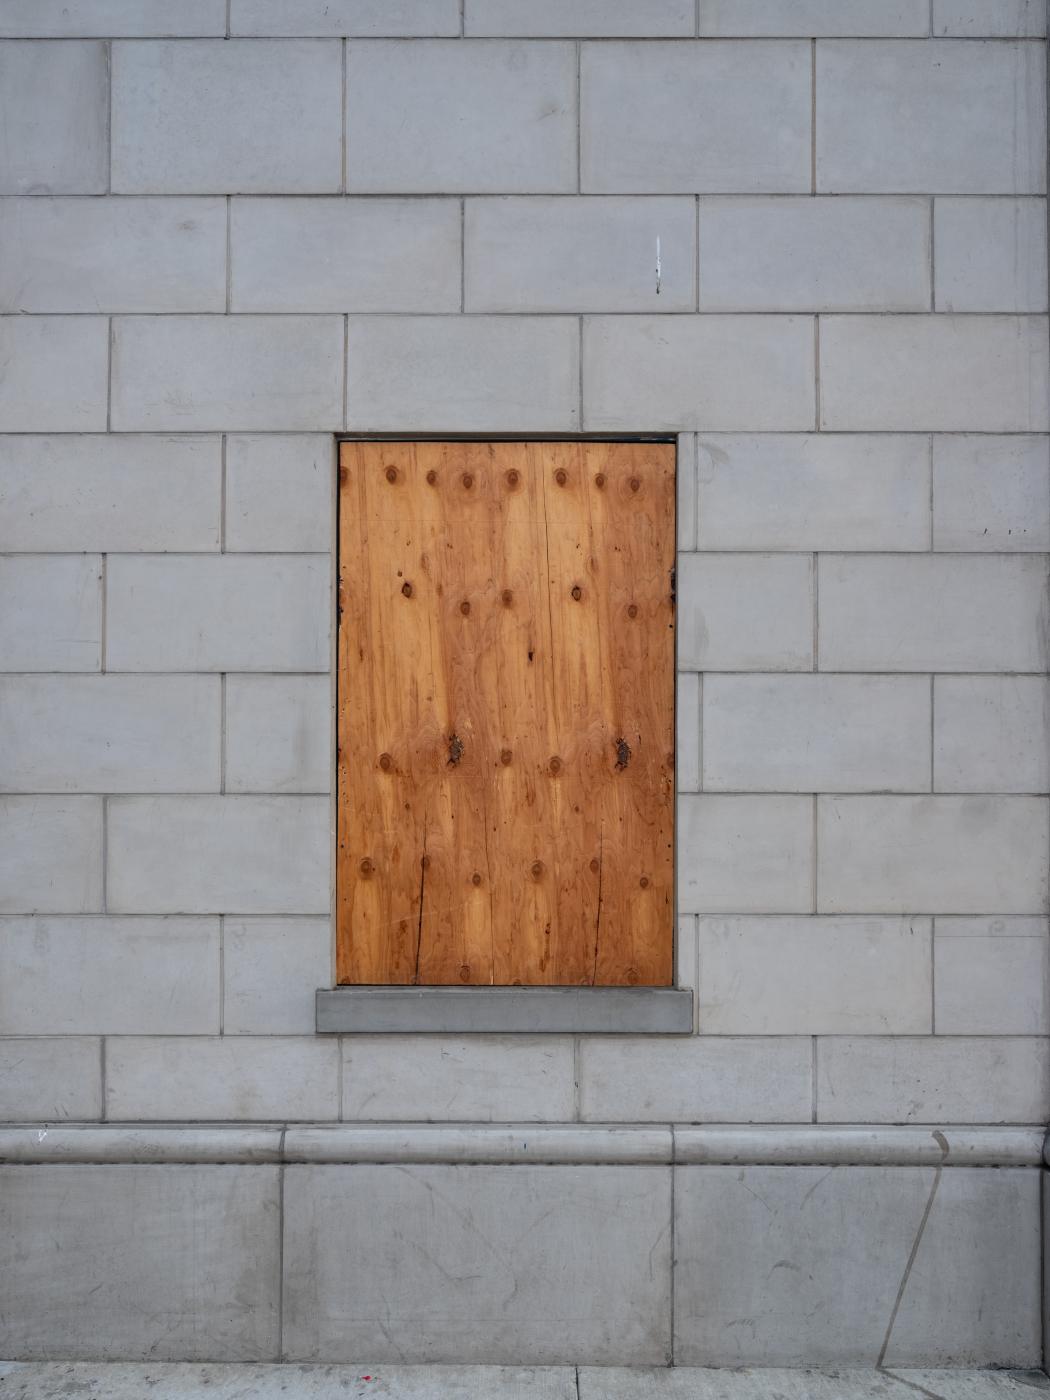 Boarded Up Window | Buy this image